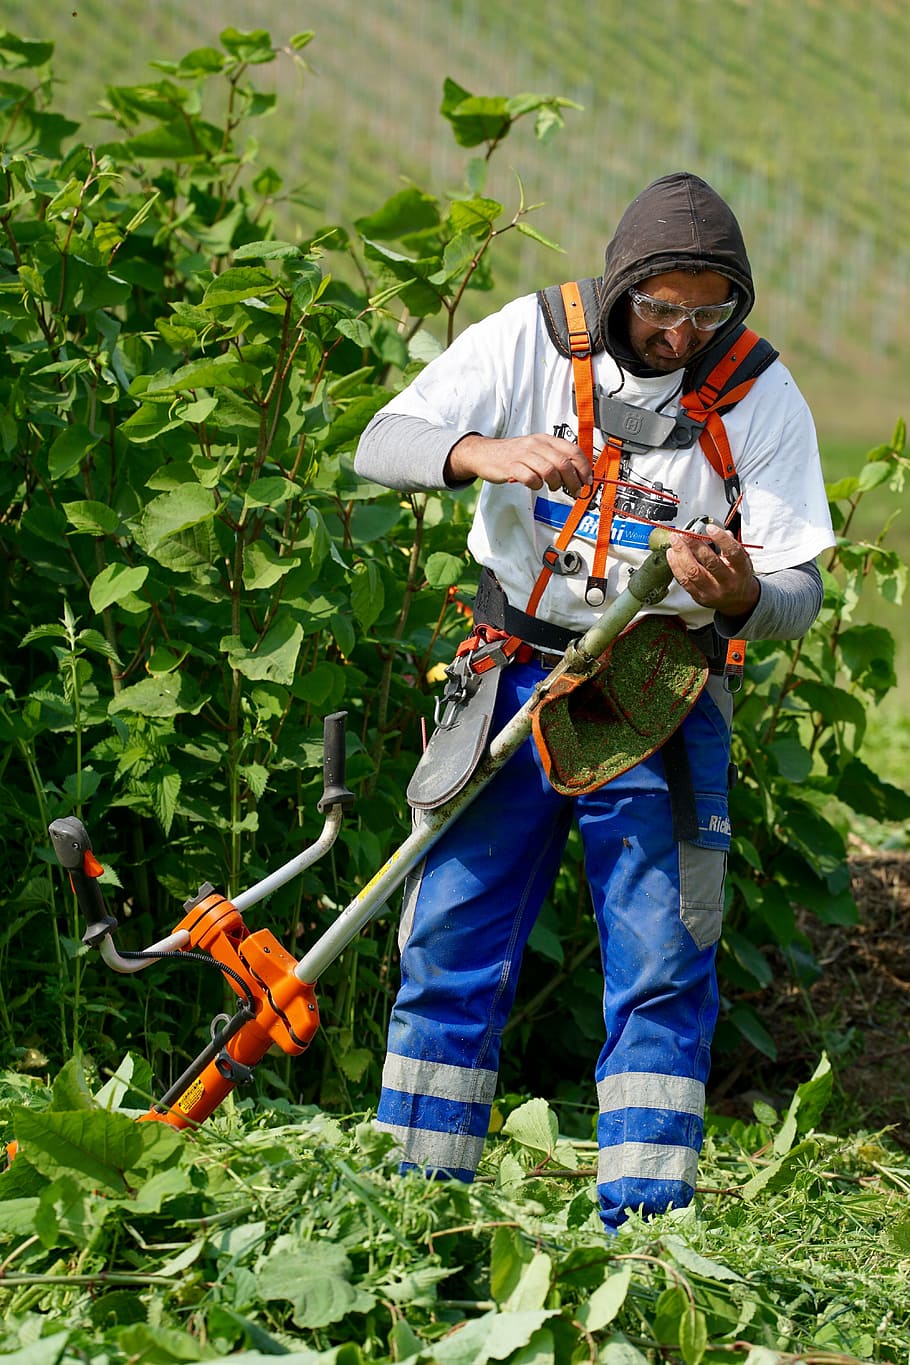 weed, man, overalls, mulcher, hand labor, spindler, working, men, manual Worker, agriculture